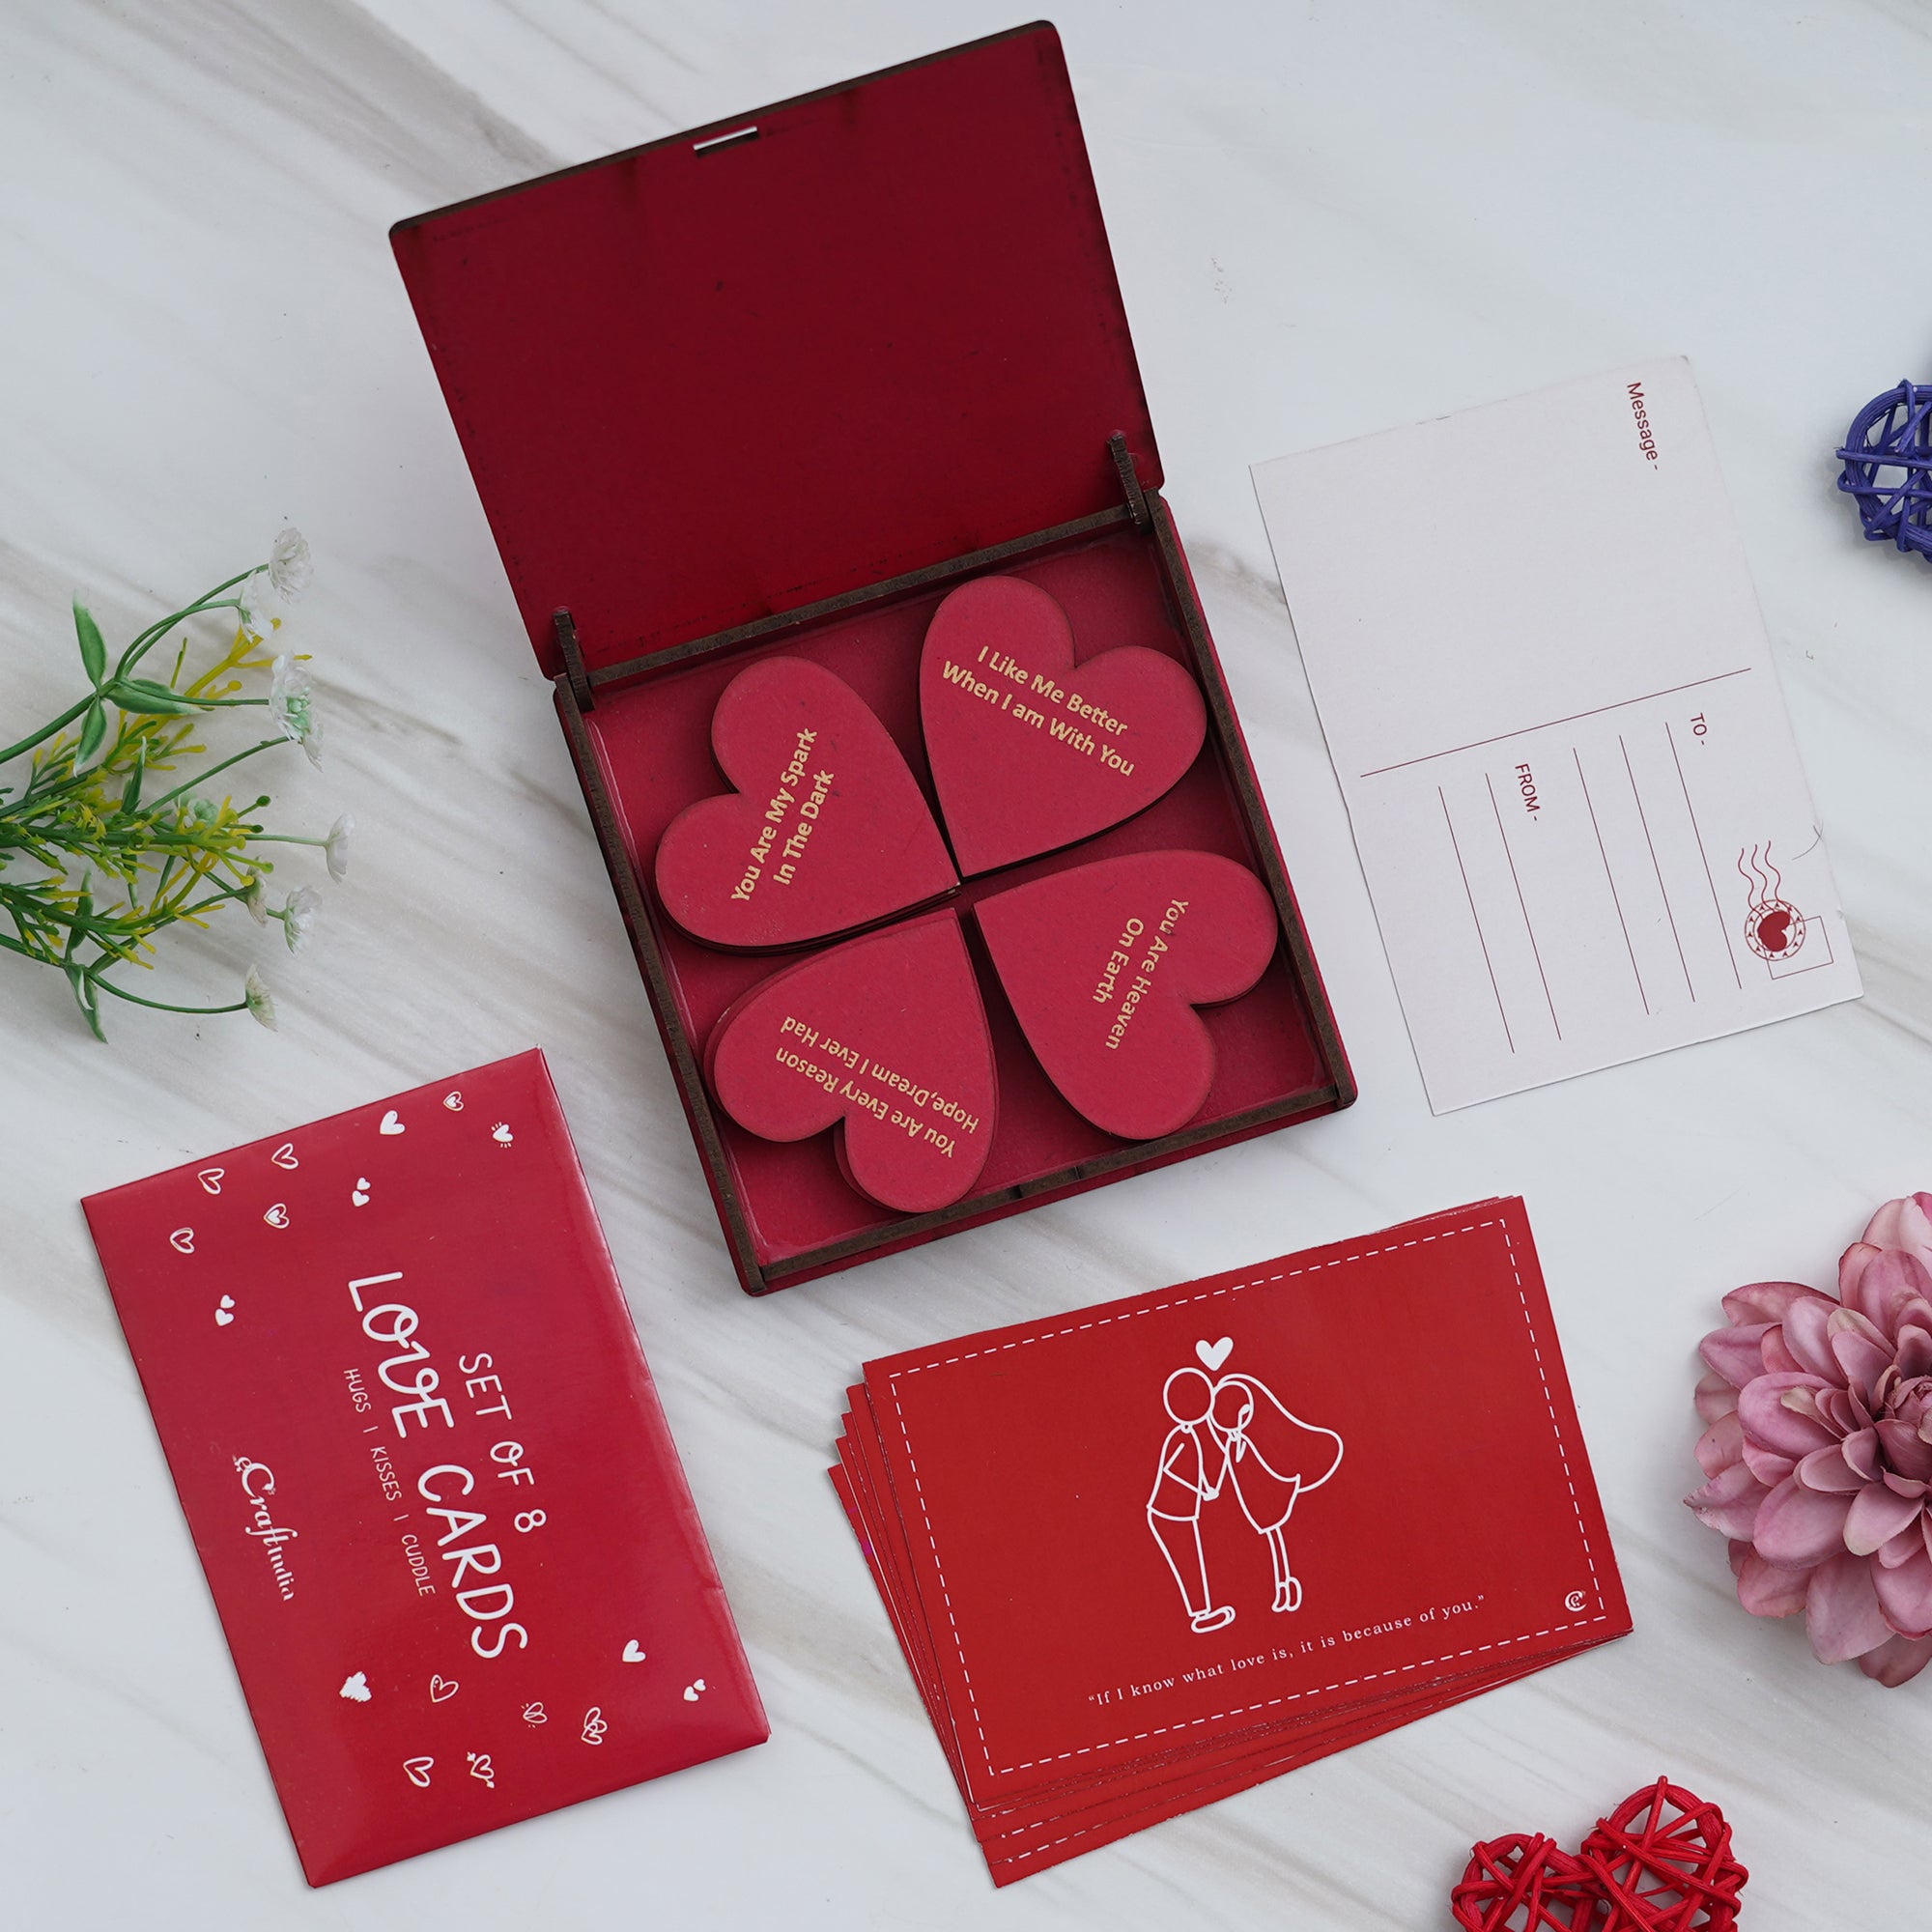 Valentine Combo of Pack of 8 Love Gift Cards, "20 Reasons Why I Love You" Printed on Little Red Hearts Decorative Wooden Gift Set Box